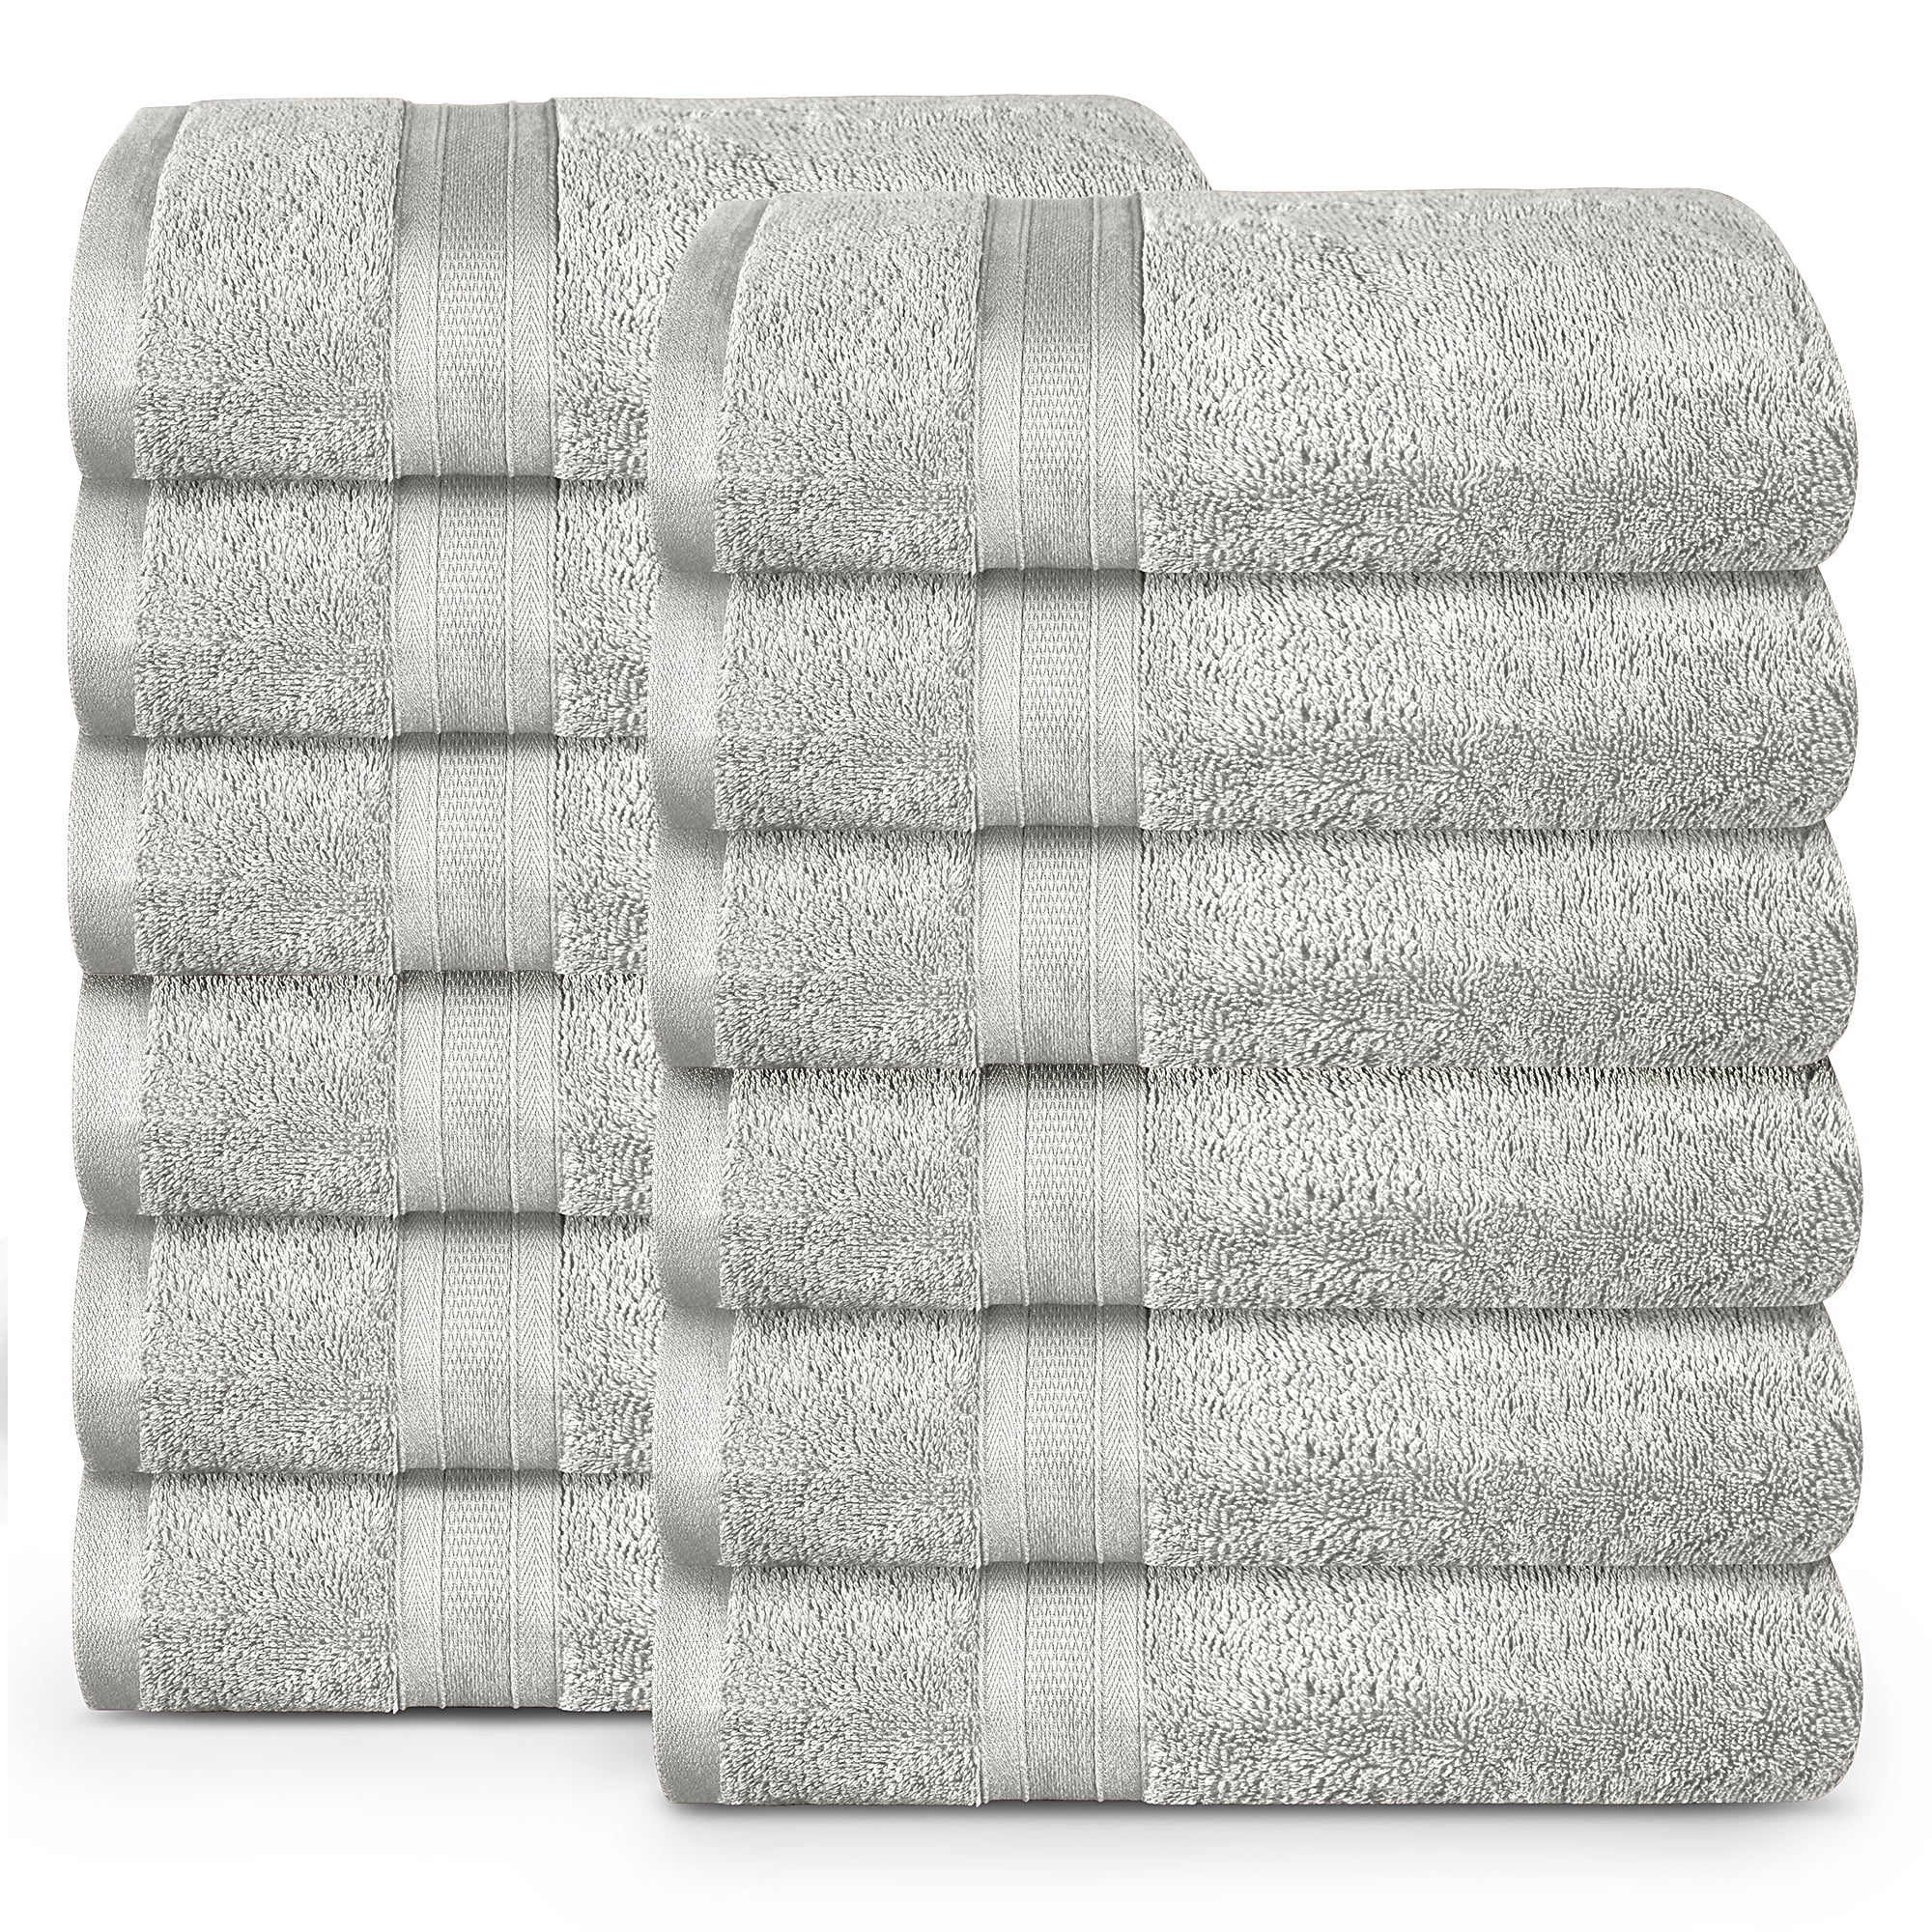 Utopia Towels 6 Piece Premium Hand Towels Set, (16 x 28 inches) 100% Ring Spun Cotton, Lightweight and Highly Absorbent Towels F